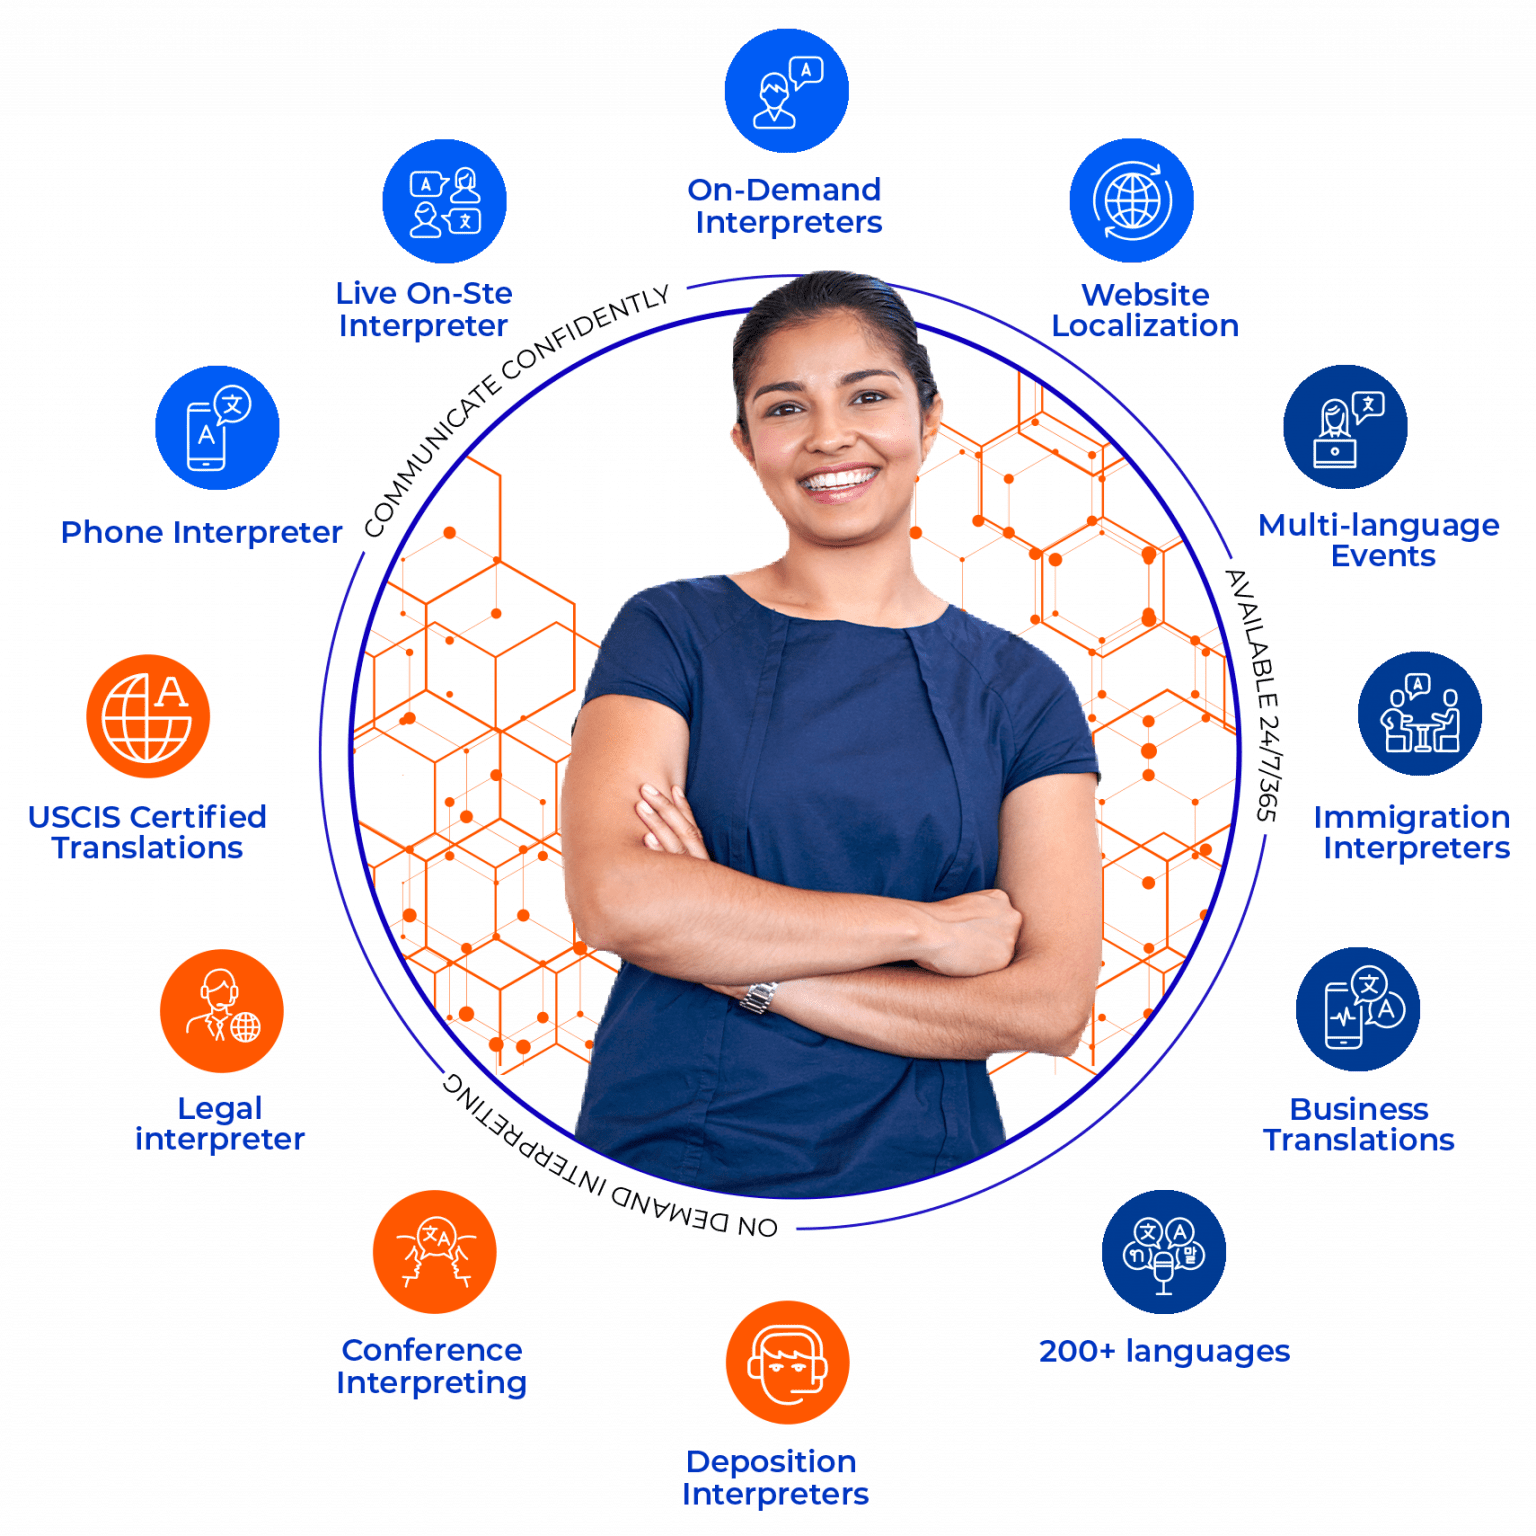 Confident woman with crossed arms surrounded by icons representing Bylyngo's language services including phone interpreting, legal interpretation, USCIS certified translations, and more against a hexagonal pattern background